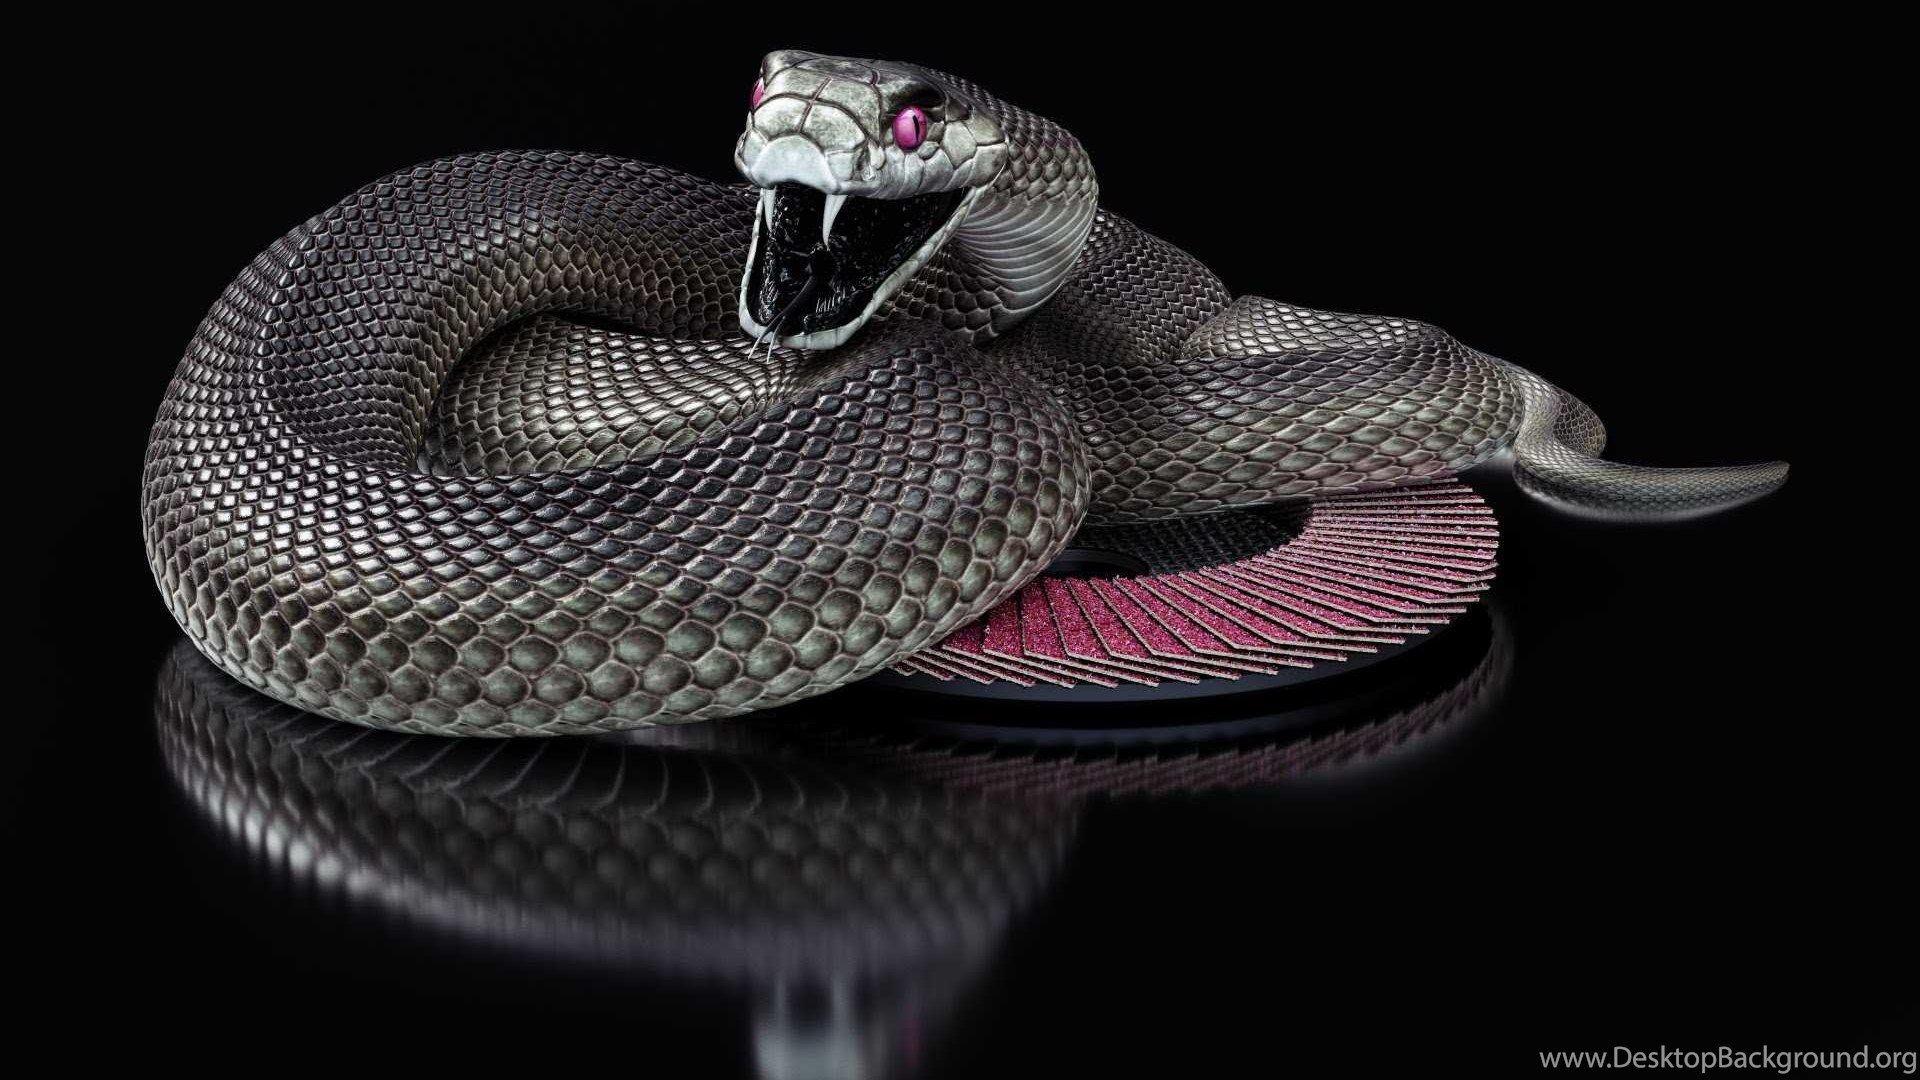 Red Snake In A Black Background Pictures Of Snakes Background Image And  Wallpaper for Free Download